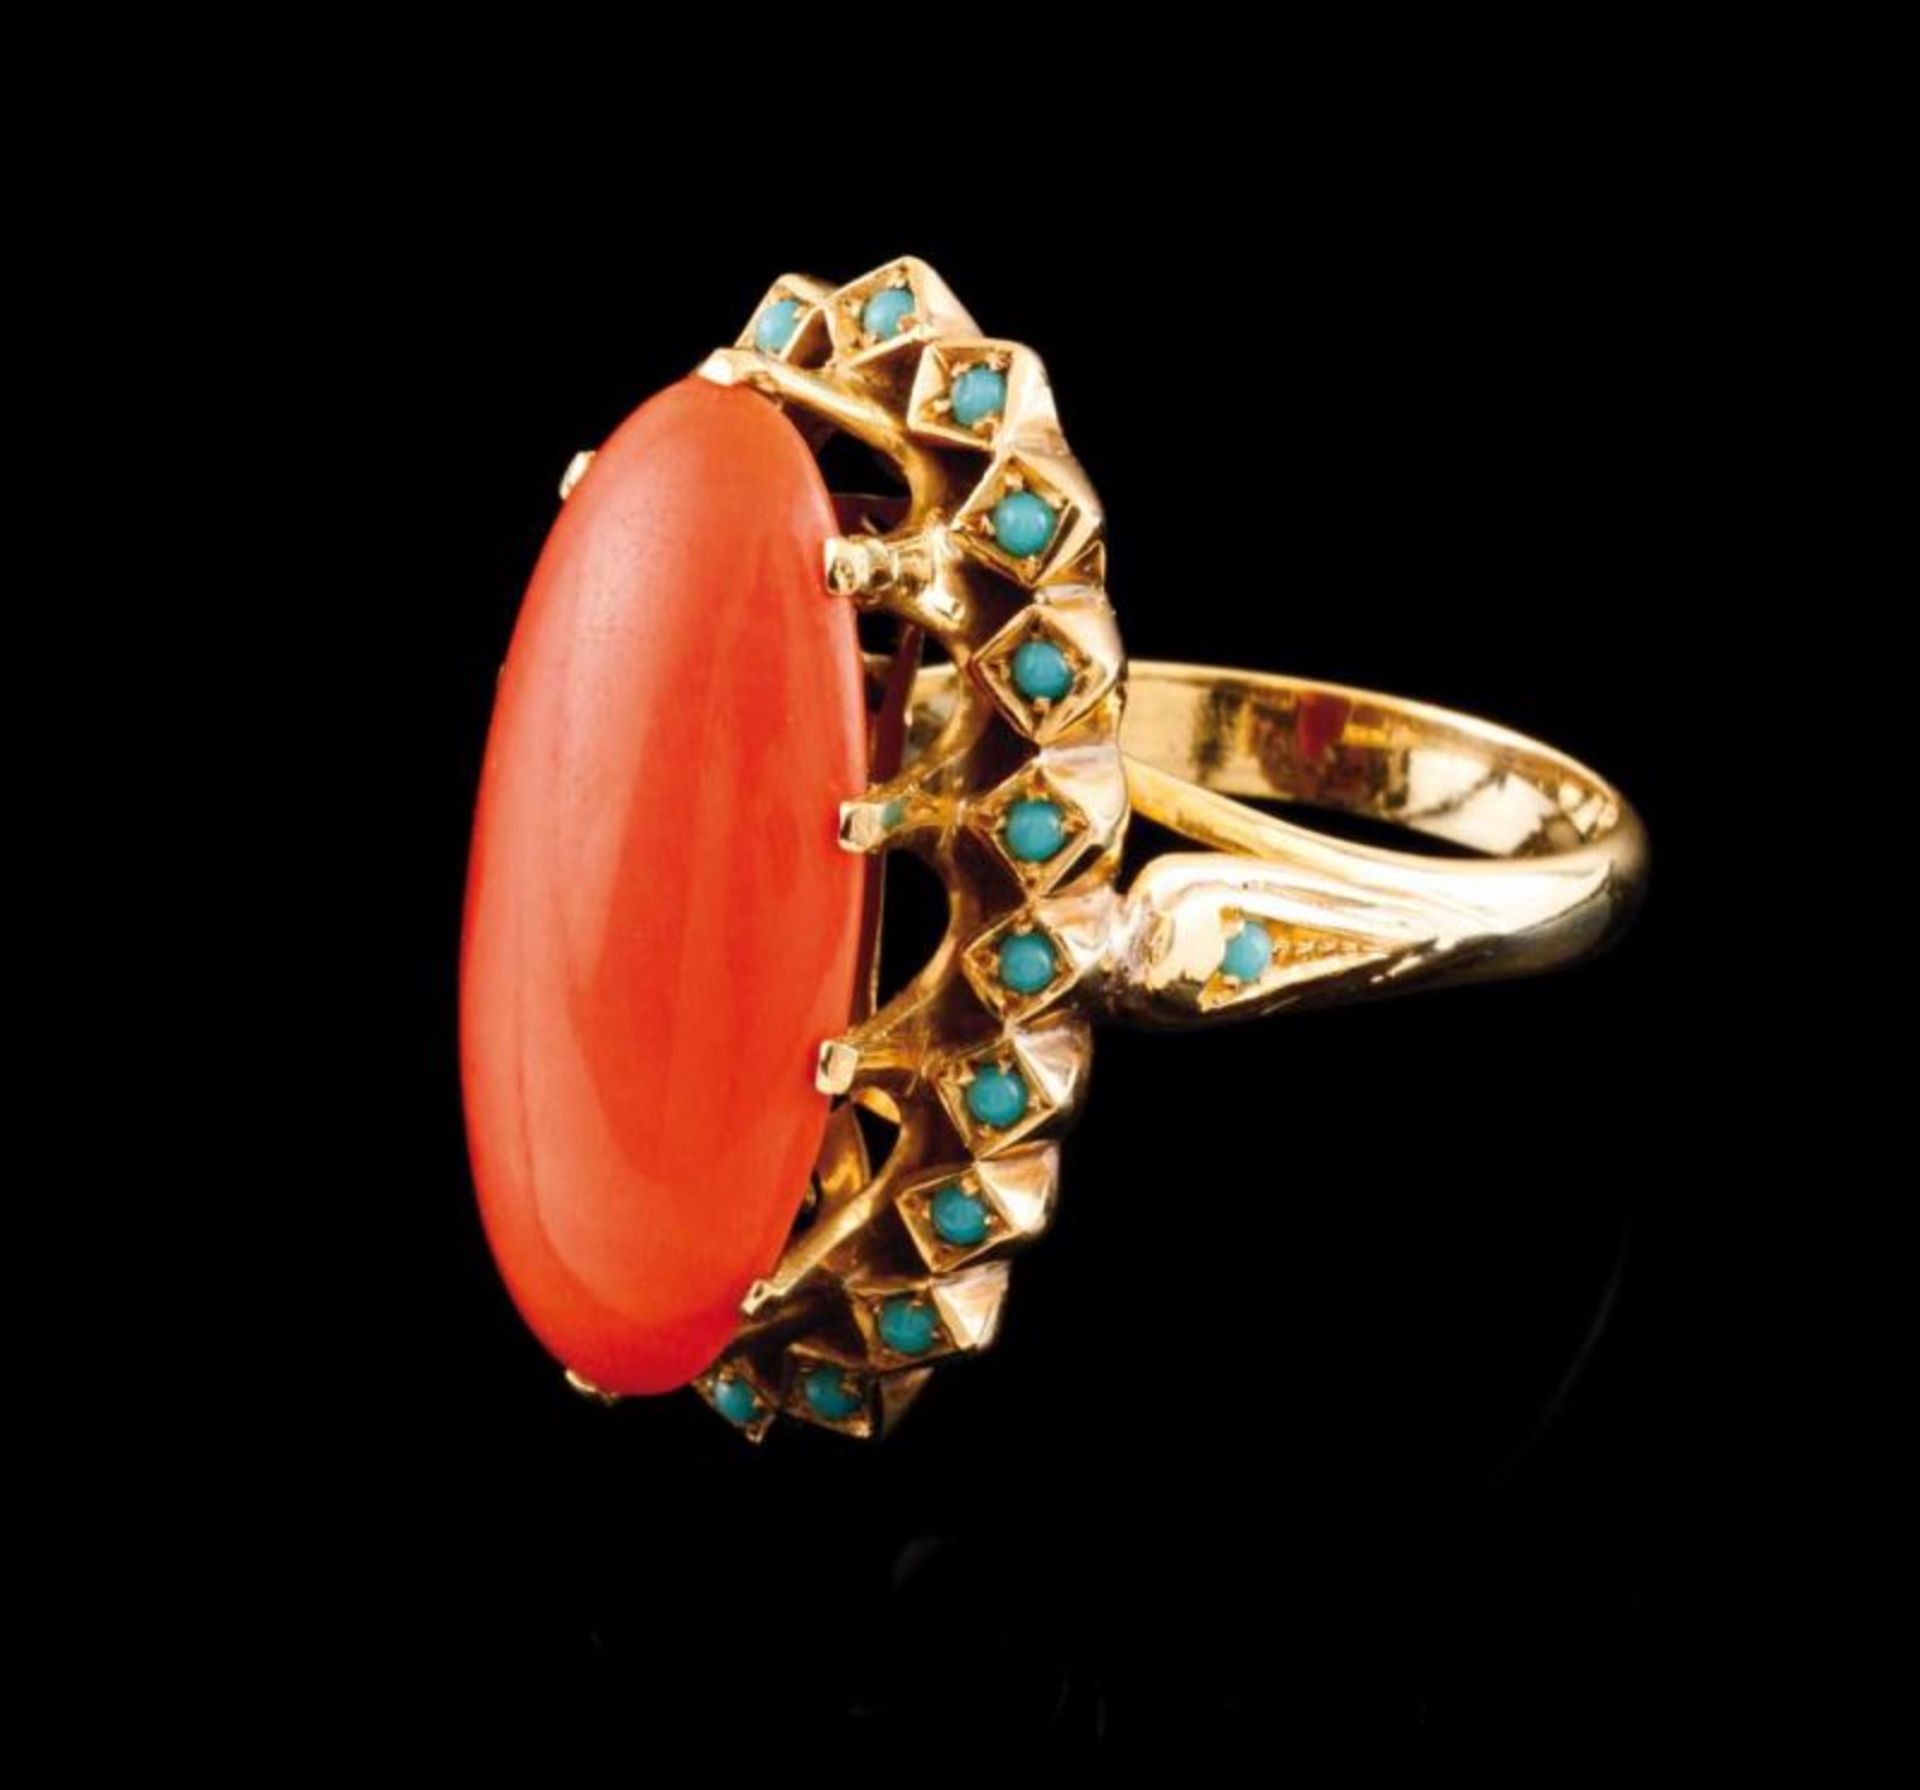 A ring Gold set with small blue beads and one oval coral cabochon Assay mark (1938-1984) (wear